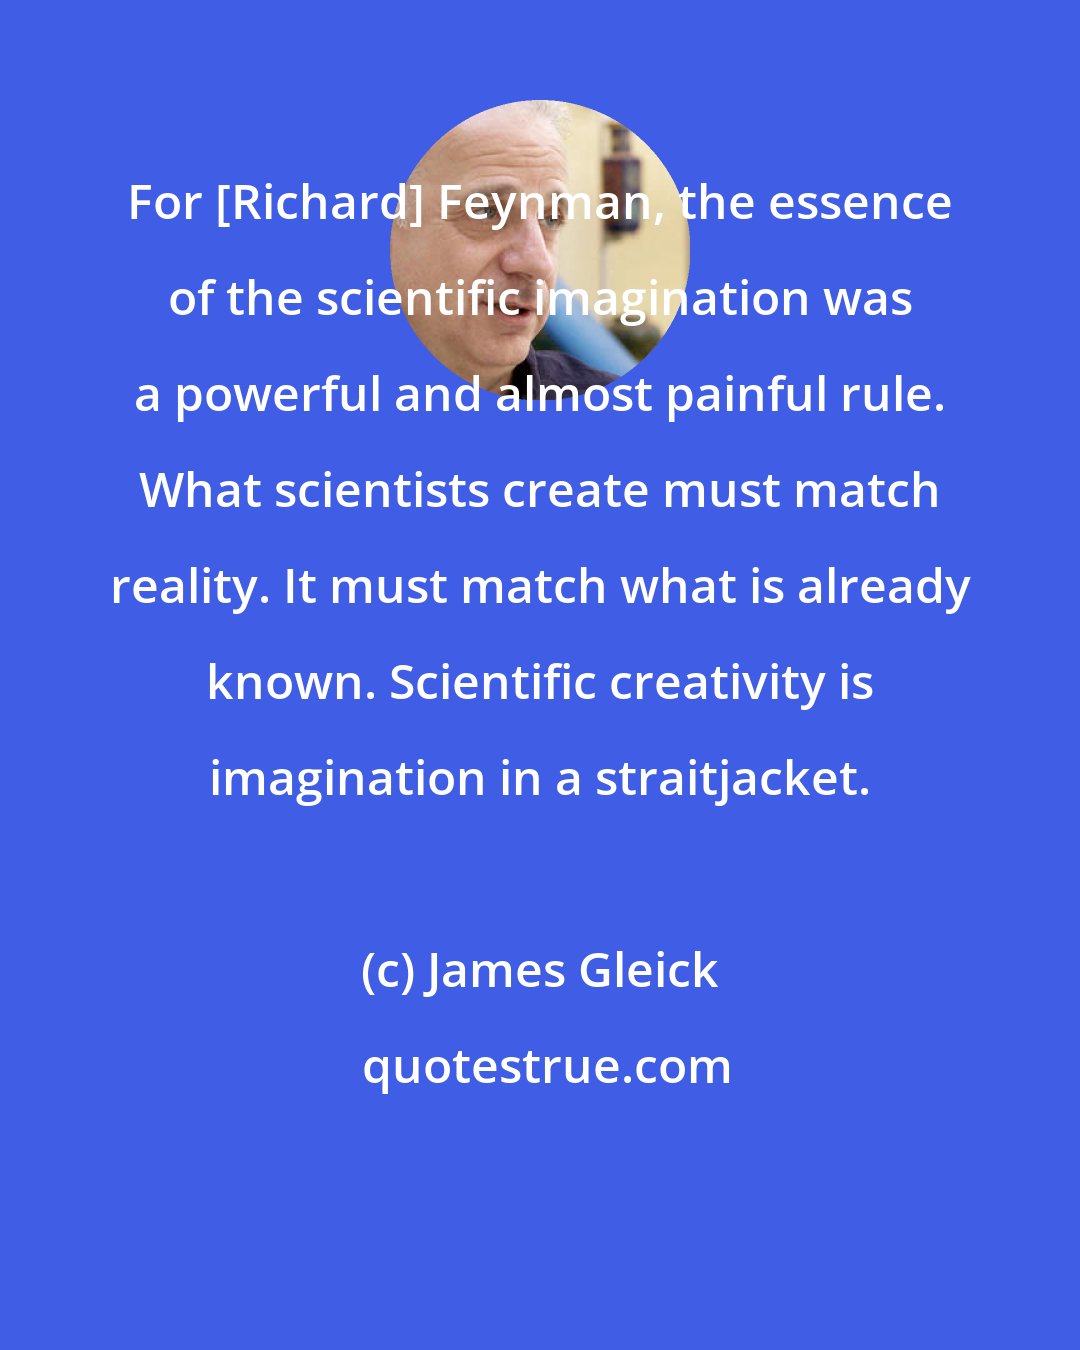 James Gleick: For [Richard] Feynman, the essence of the scientific imagination was a powerful and almost painful rule. What scientists create must match reality. It must match what is already known. Scientific creativity is imagination in a straitjacket.